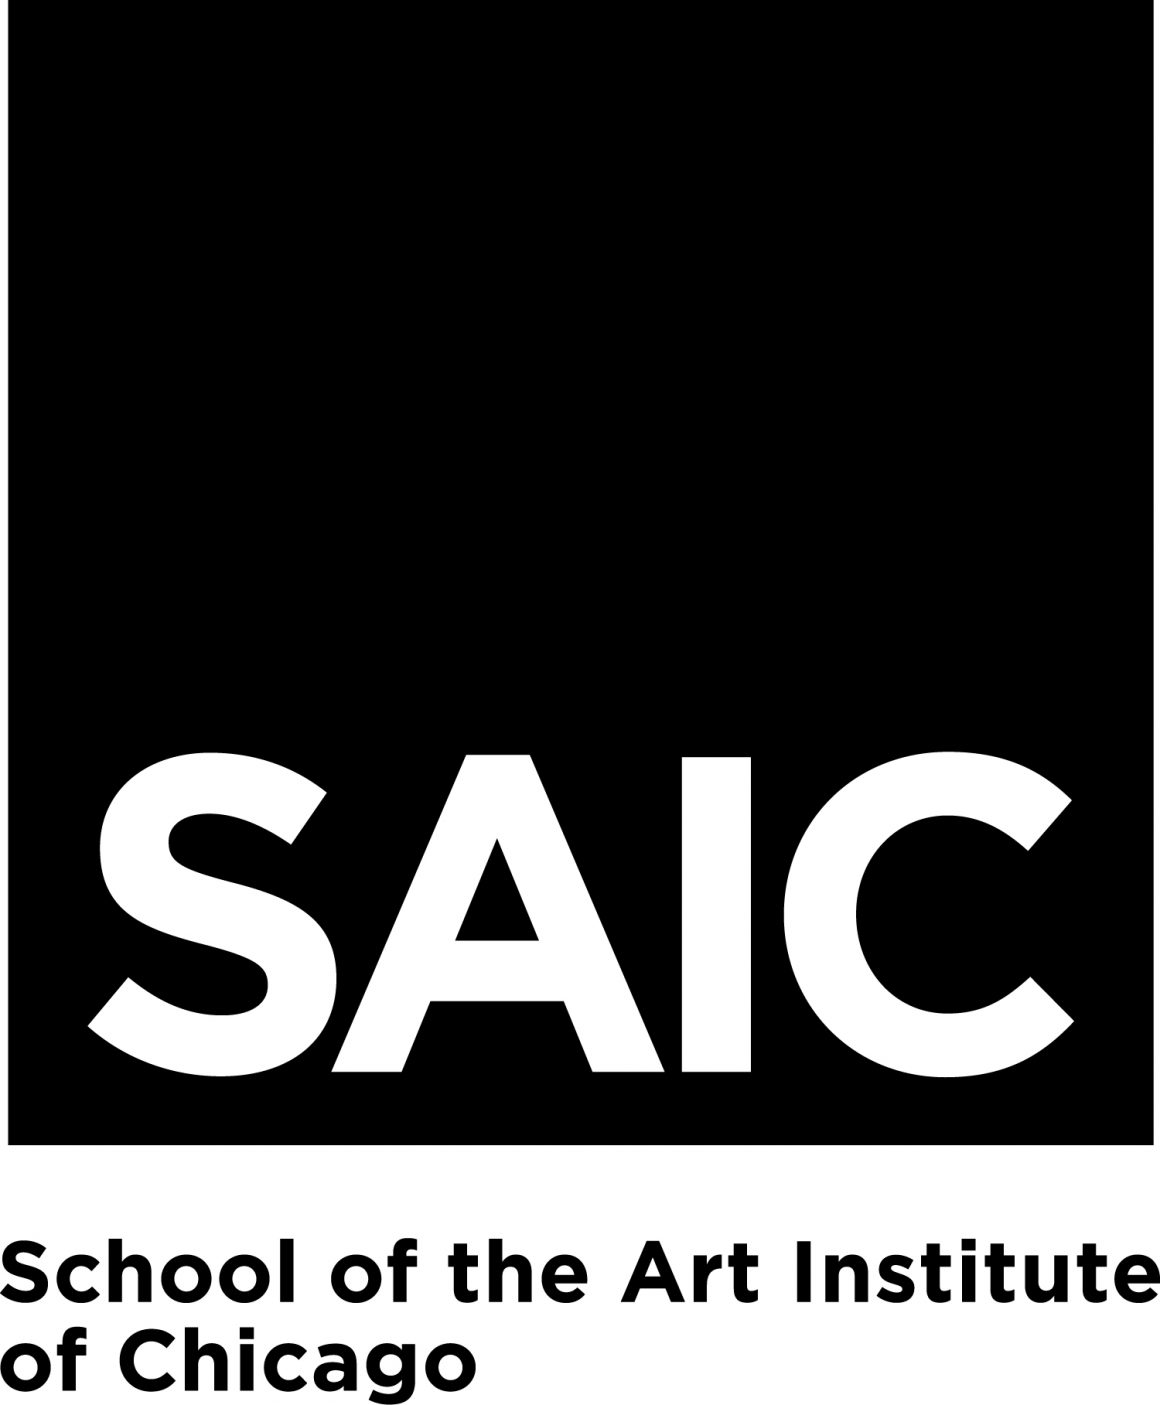 FULL-TIME VISITING FACULTY POSITION IN THE DEPARTMENT OF ARTS ADMINISTRATION & POLICY